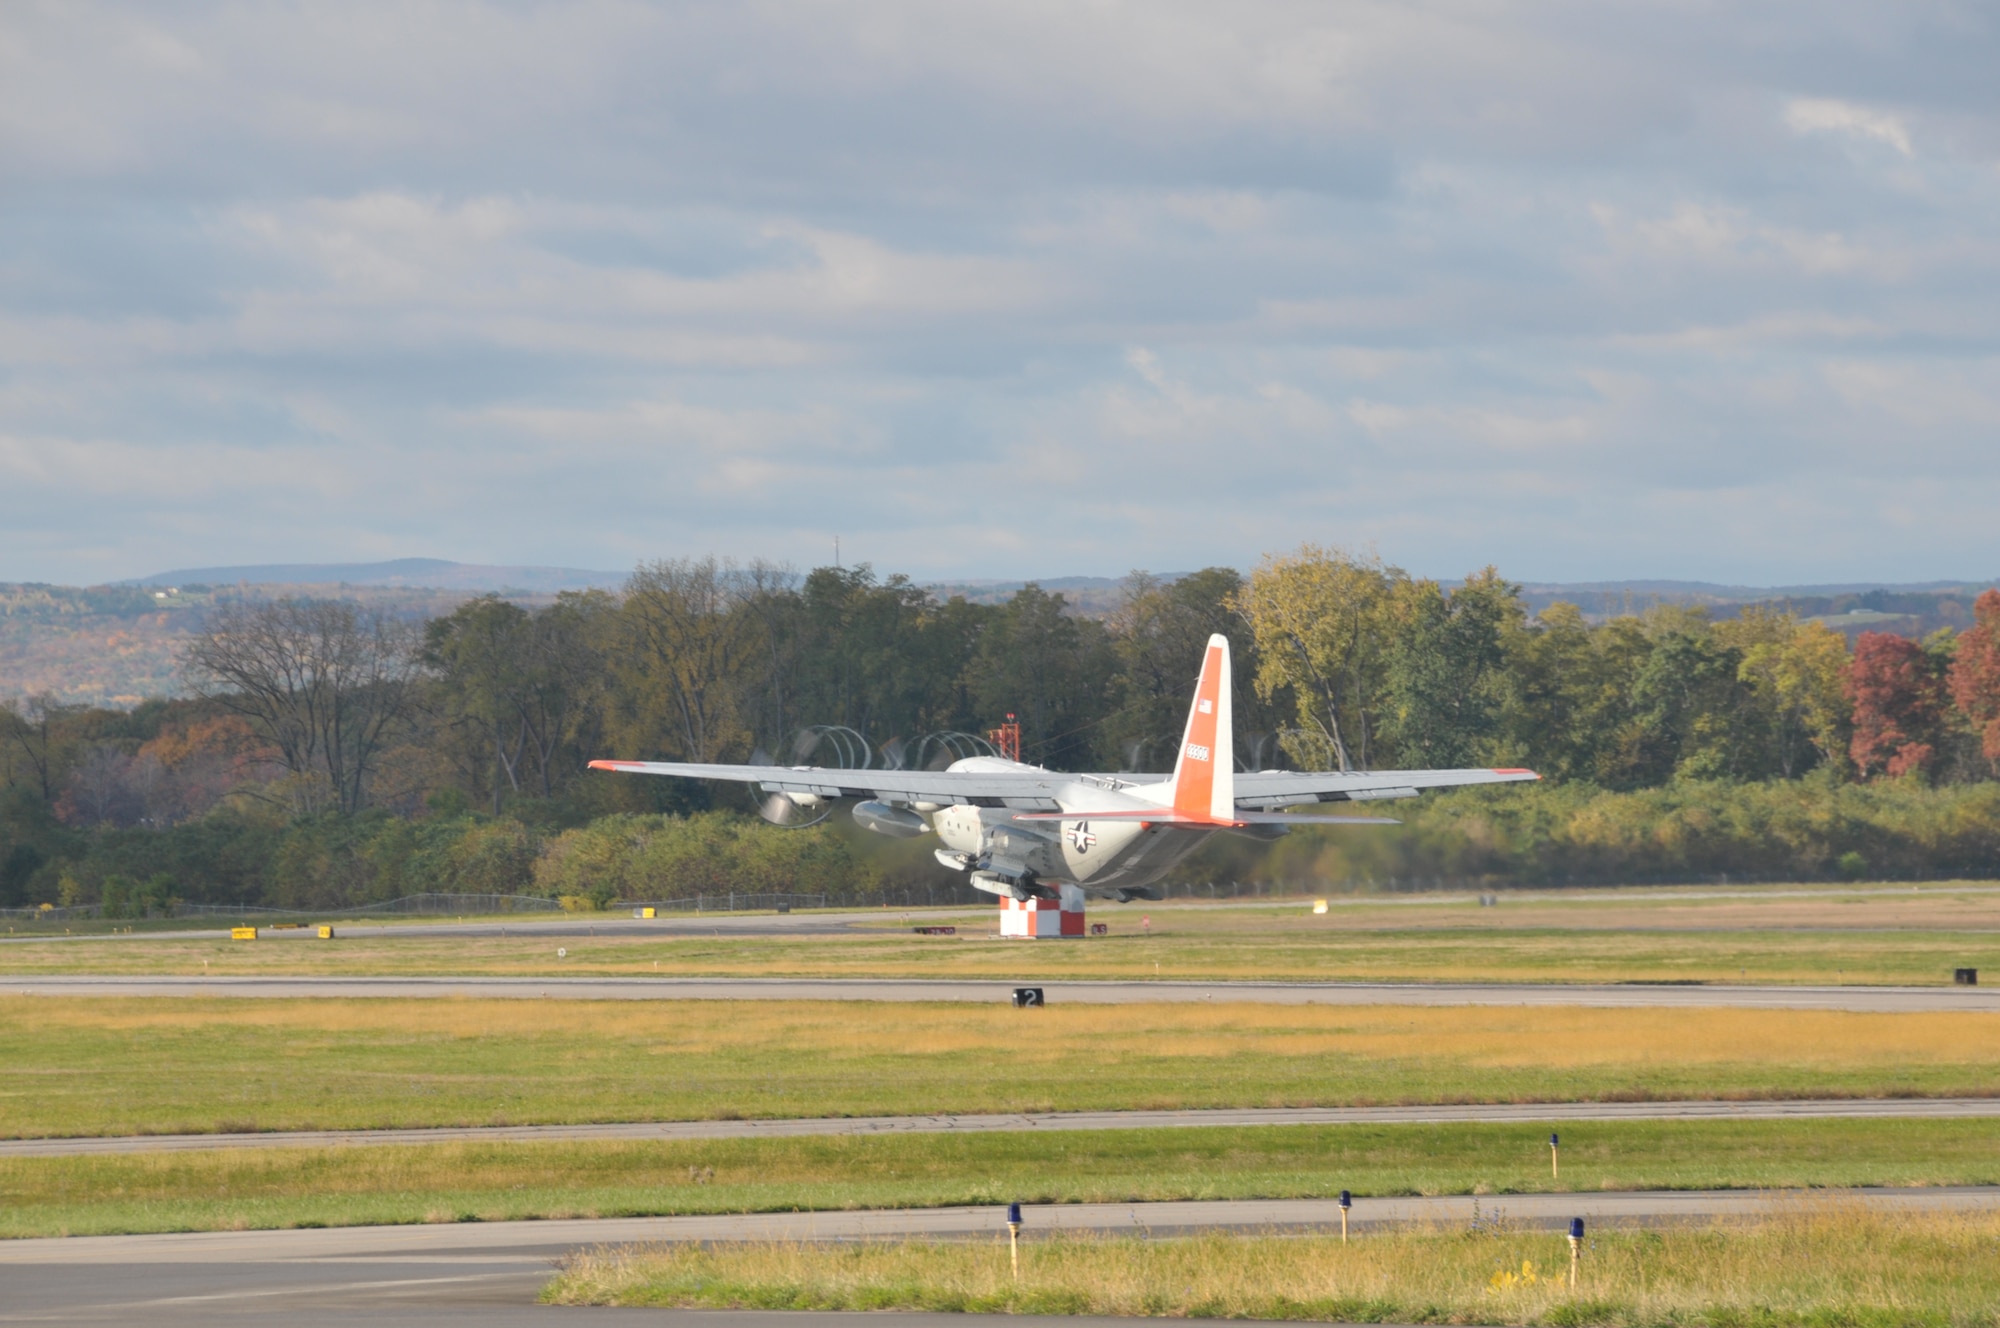 SCOTIA, NY -  An LC-130 aircraft bound for Antarctica in support of Operation DEEP FREEZE takes off from Stratton Air National Guard Base Oct. 18, 2013. (Air National Guard photo by Master Sgt. William M. Gizara/Released)